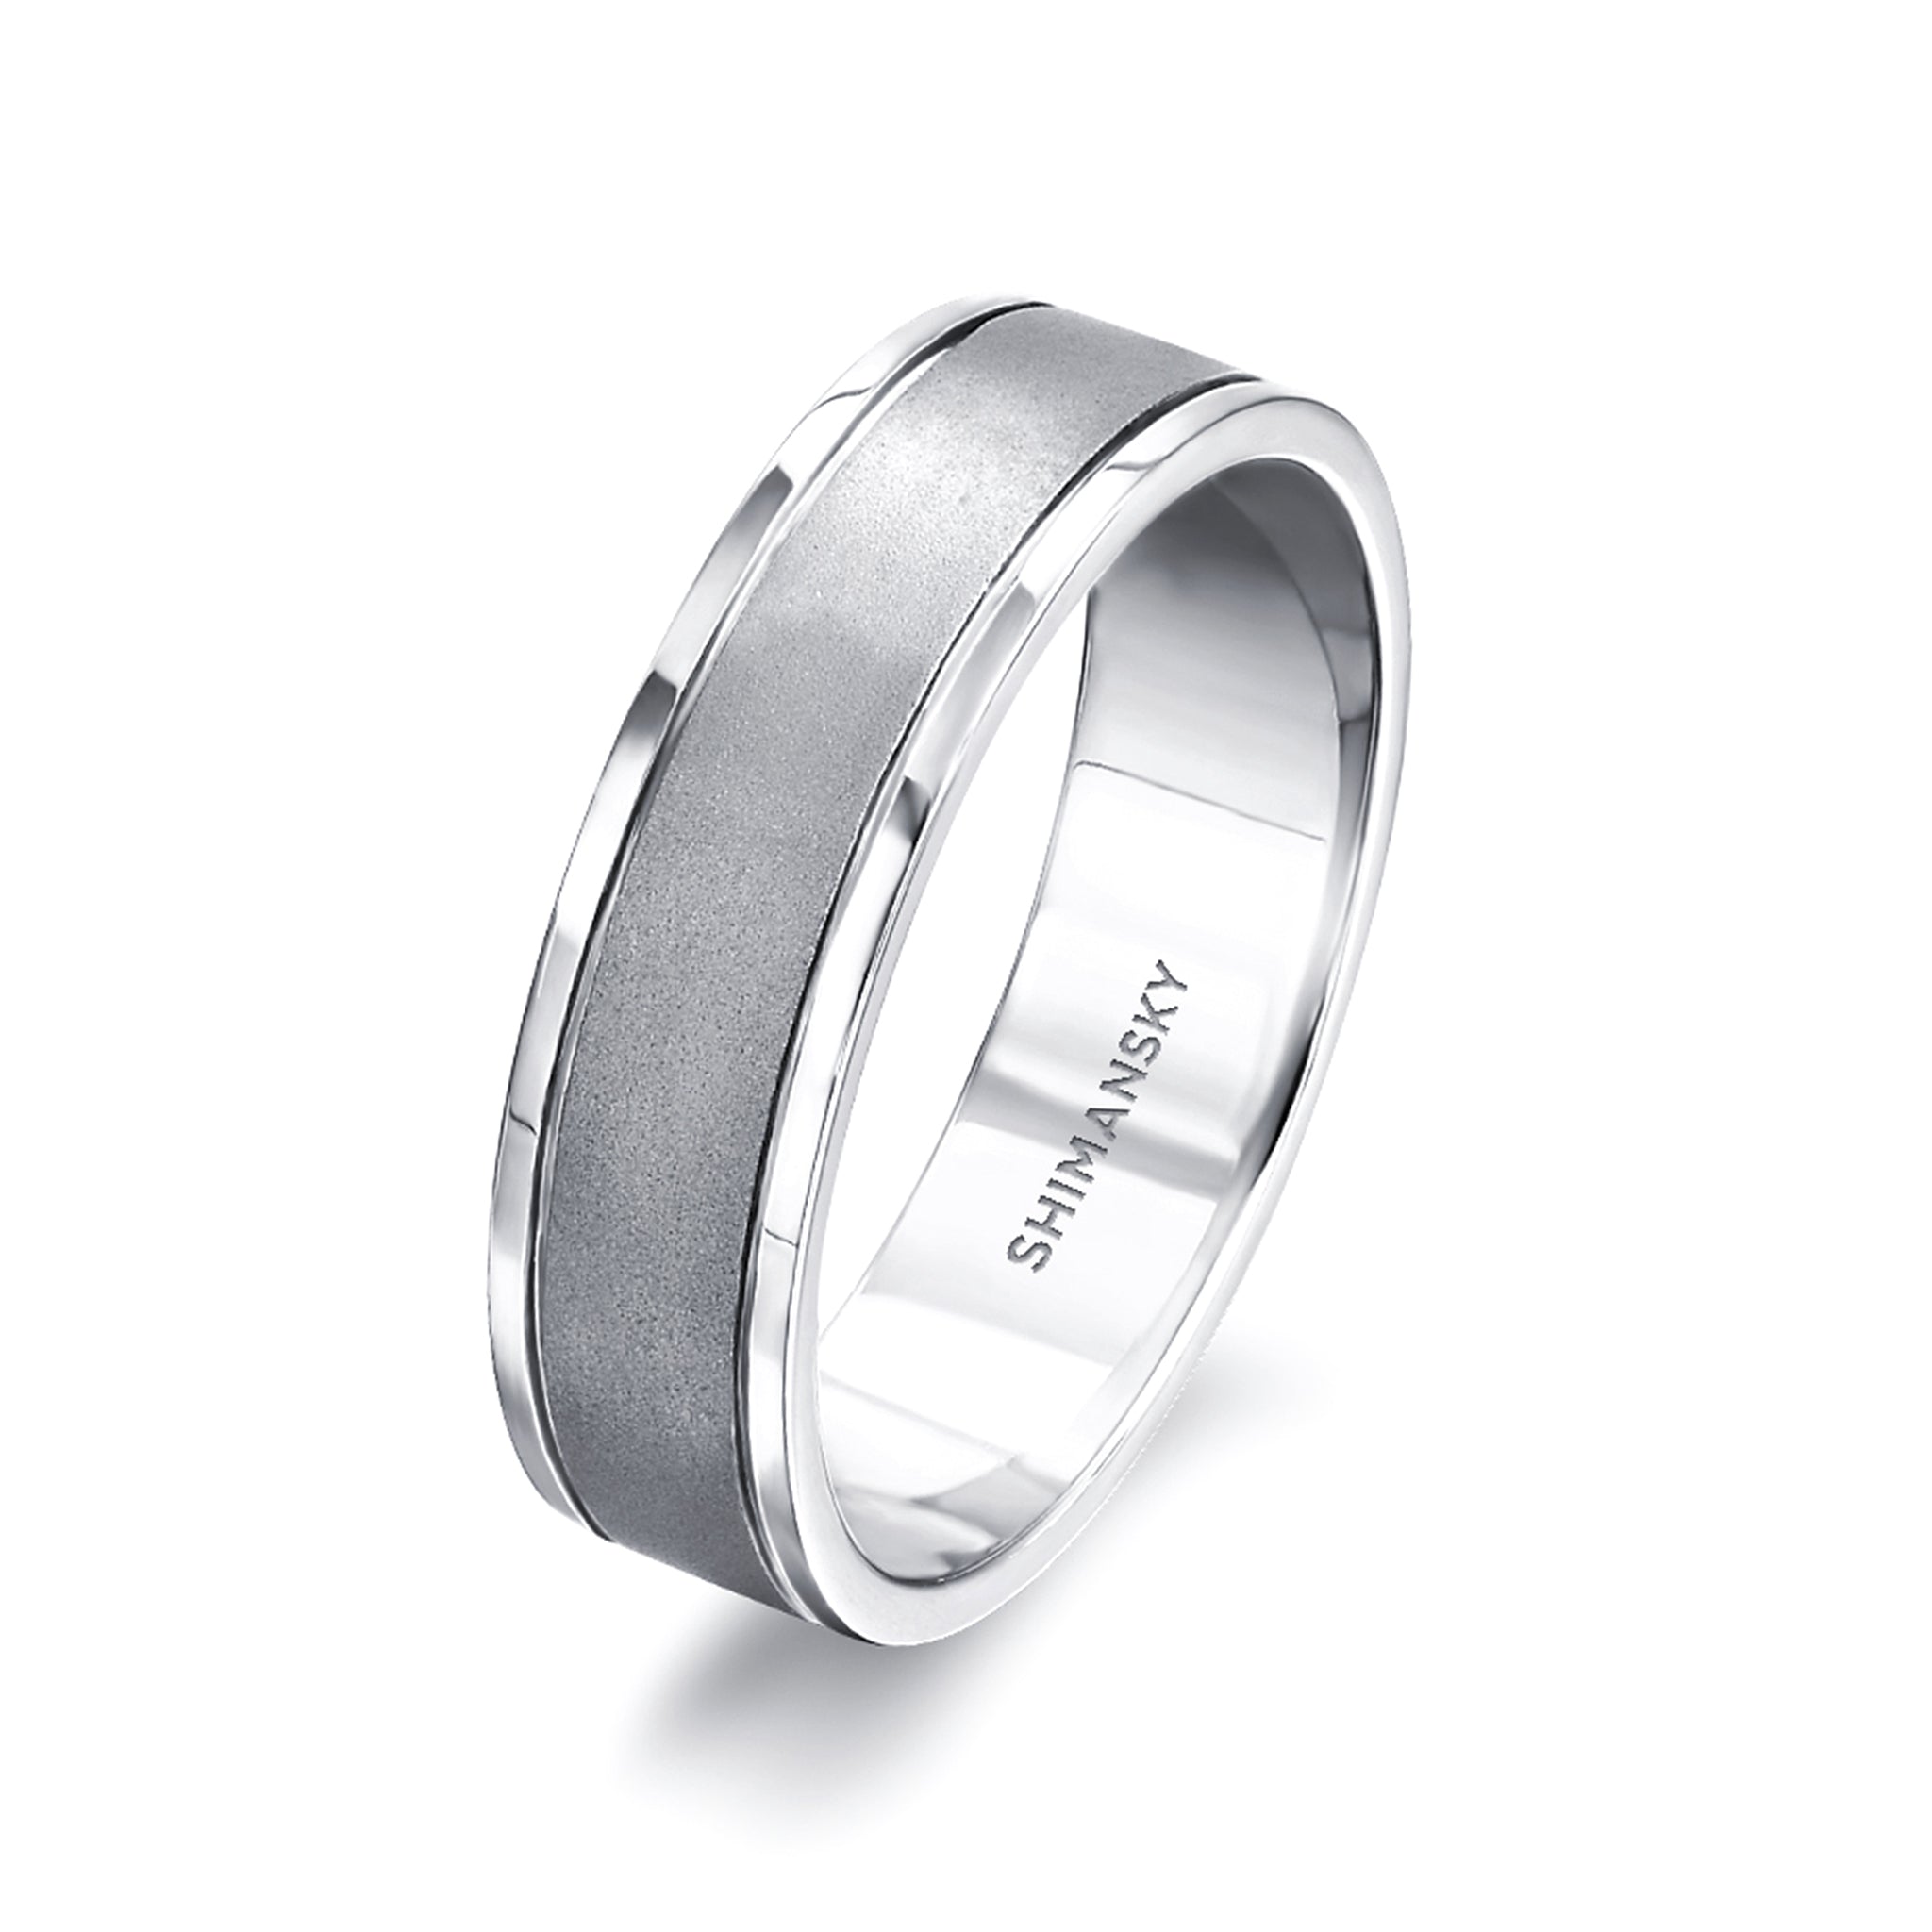 Shimansky - Max-line Double Grooved Wedding Band in Satin Finished Palladium